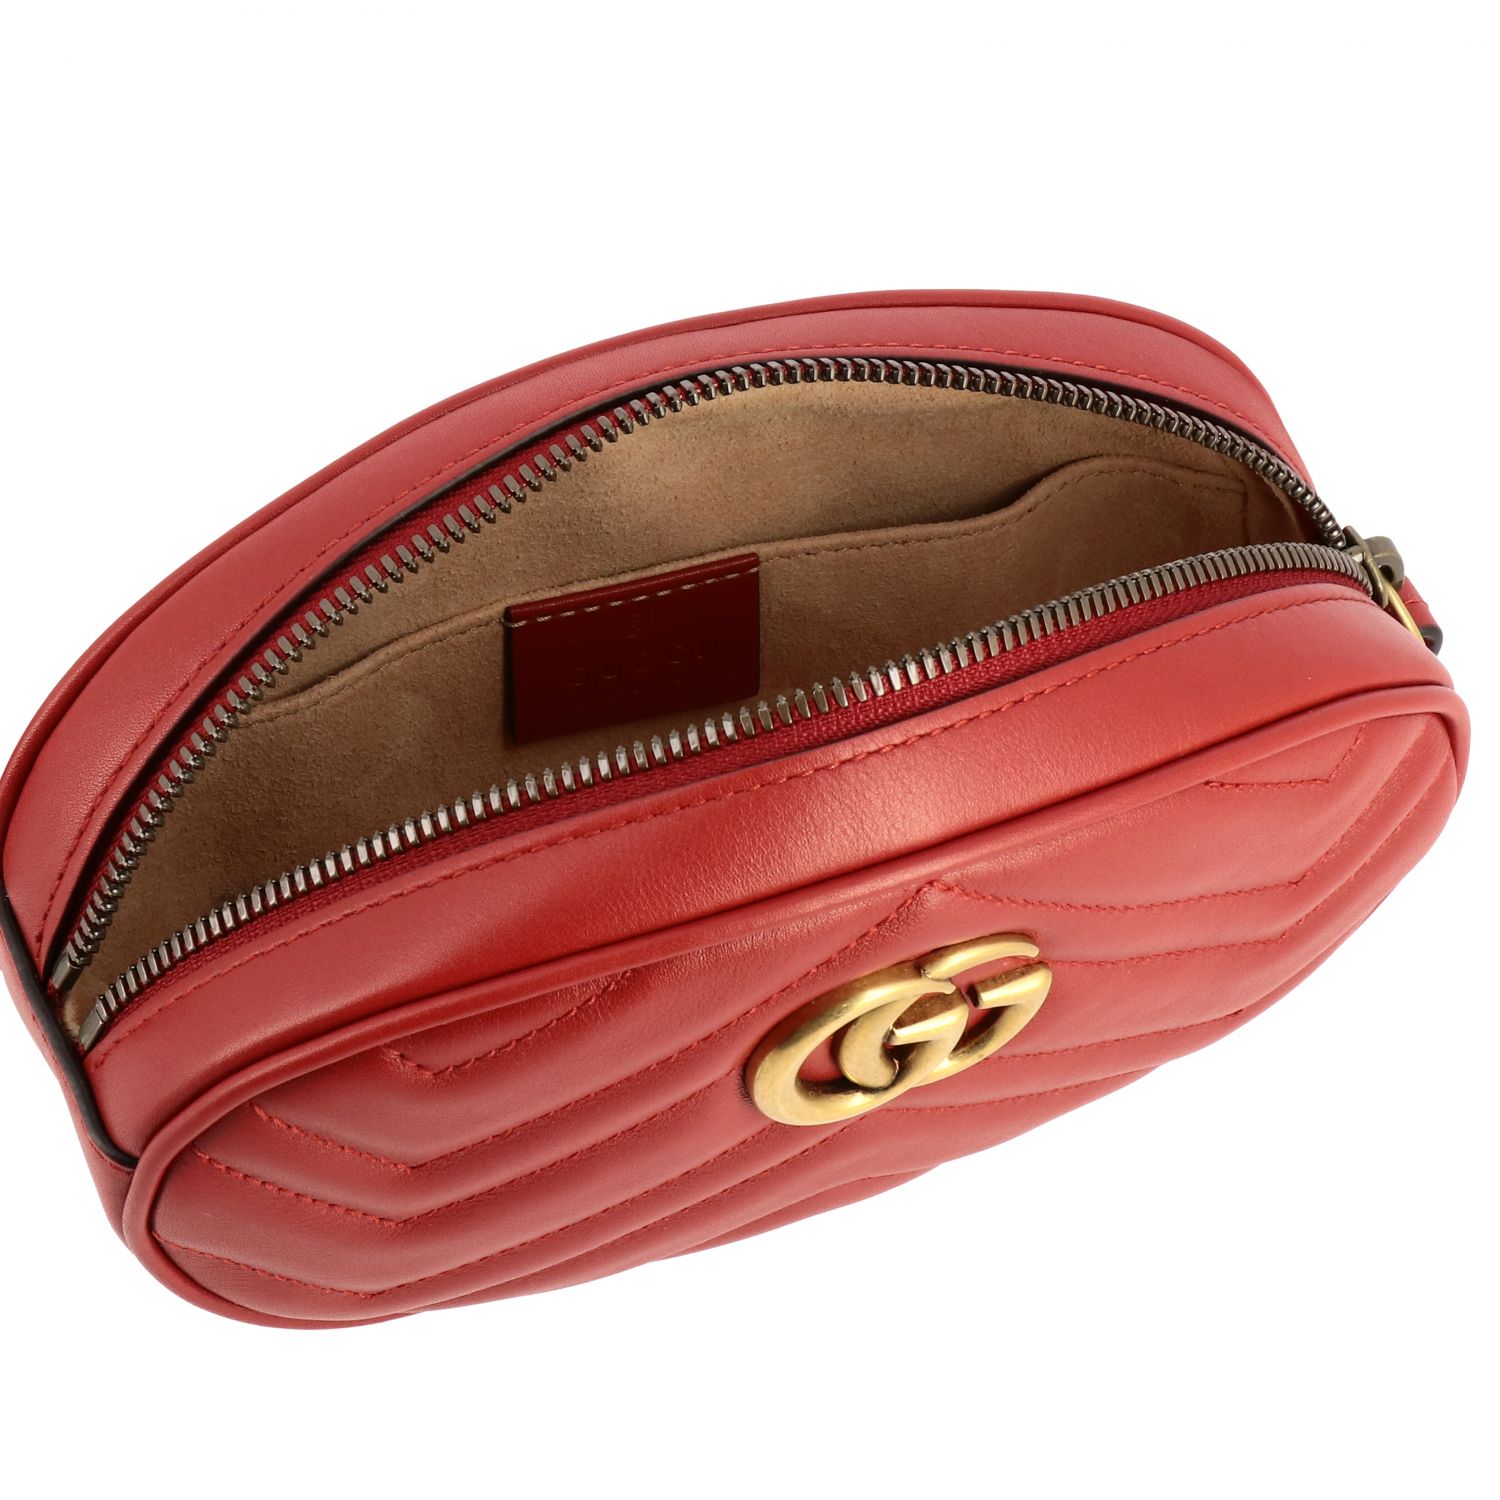 GUCCI: GG Marmont belt bag in chevron leather - Red | Belt Bag Gucci